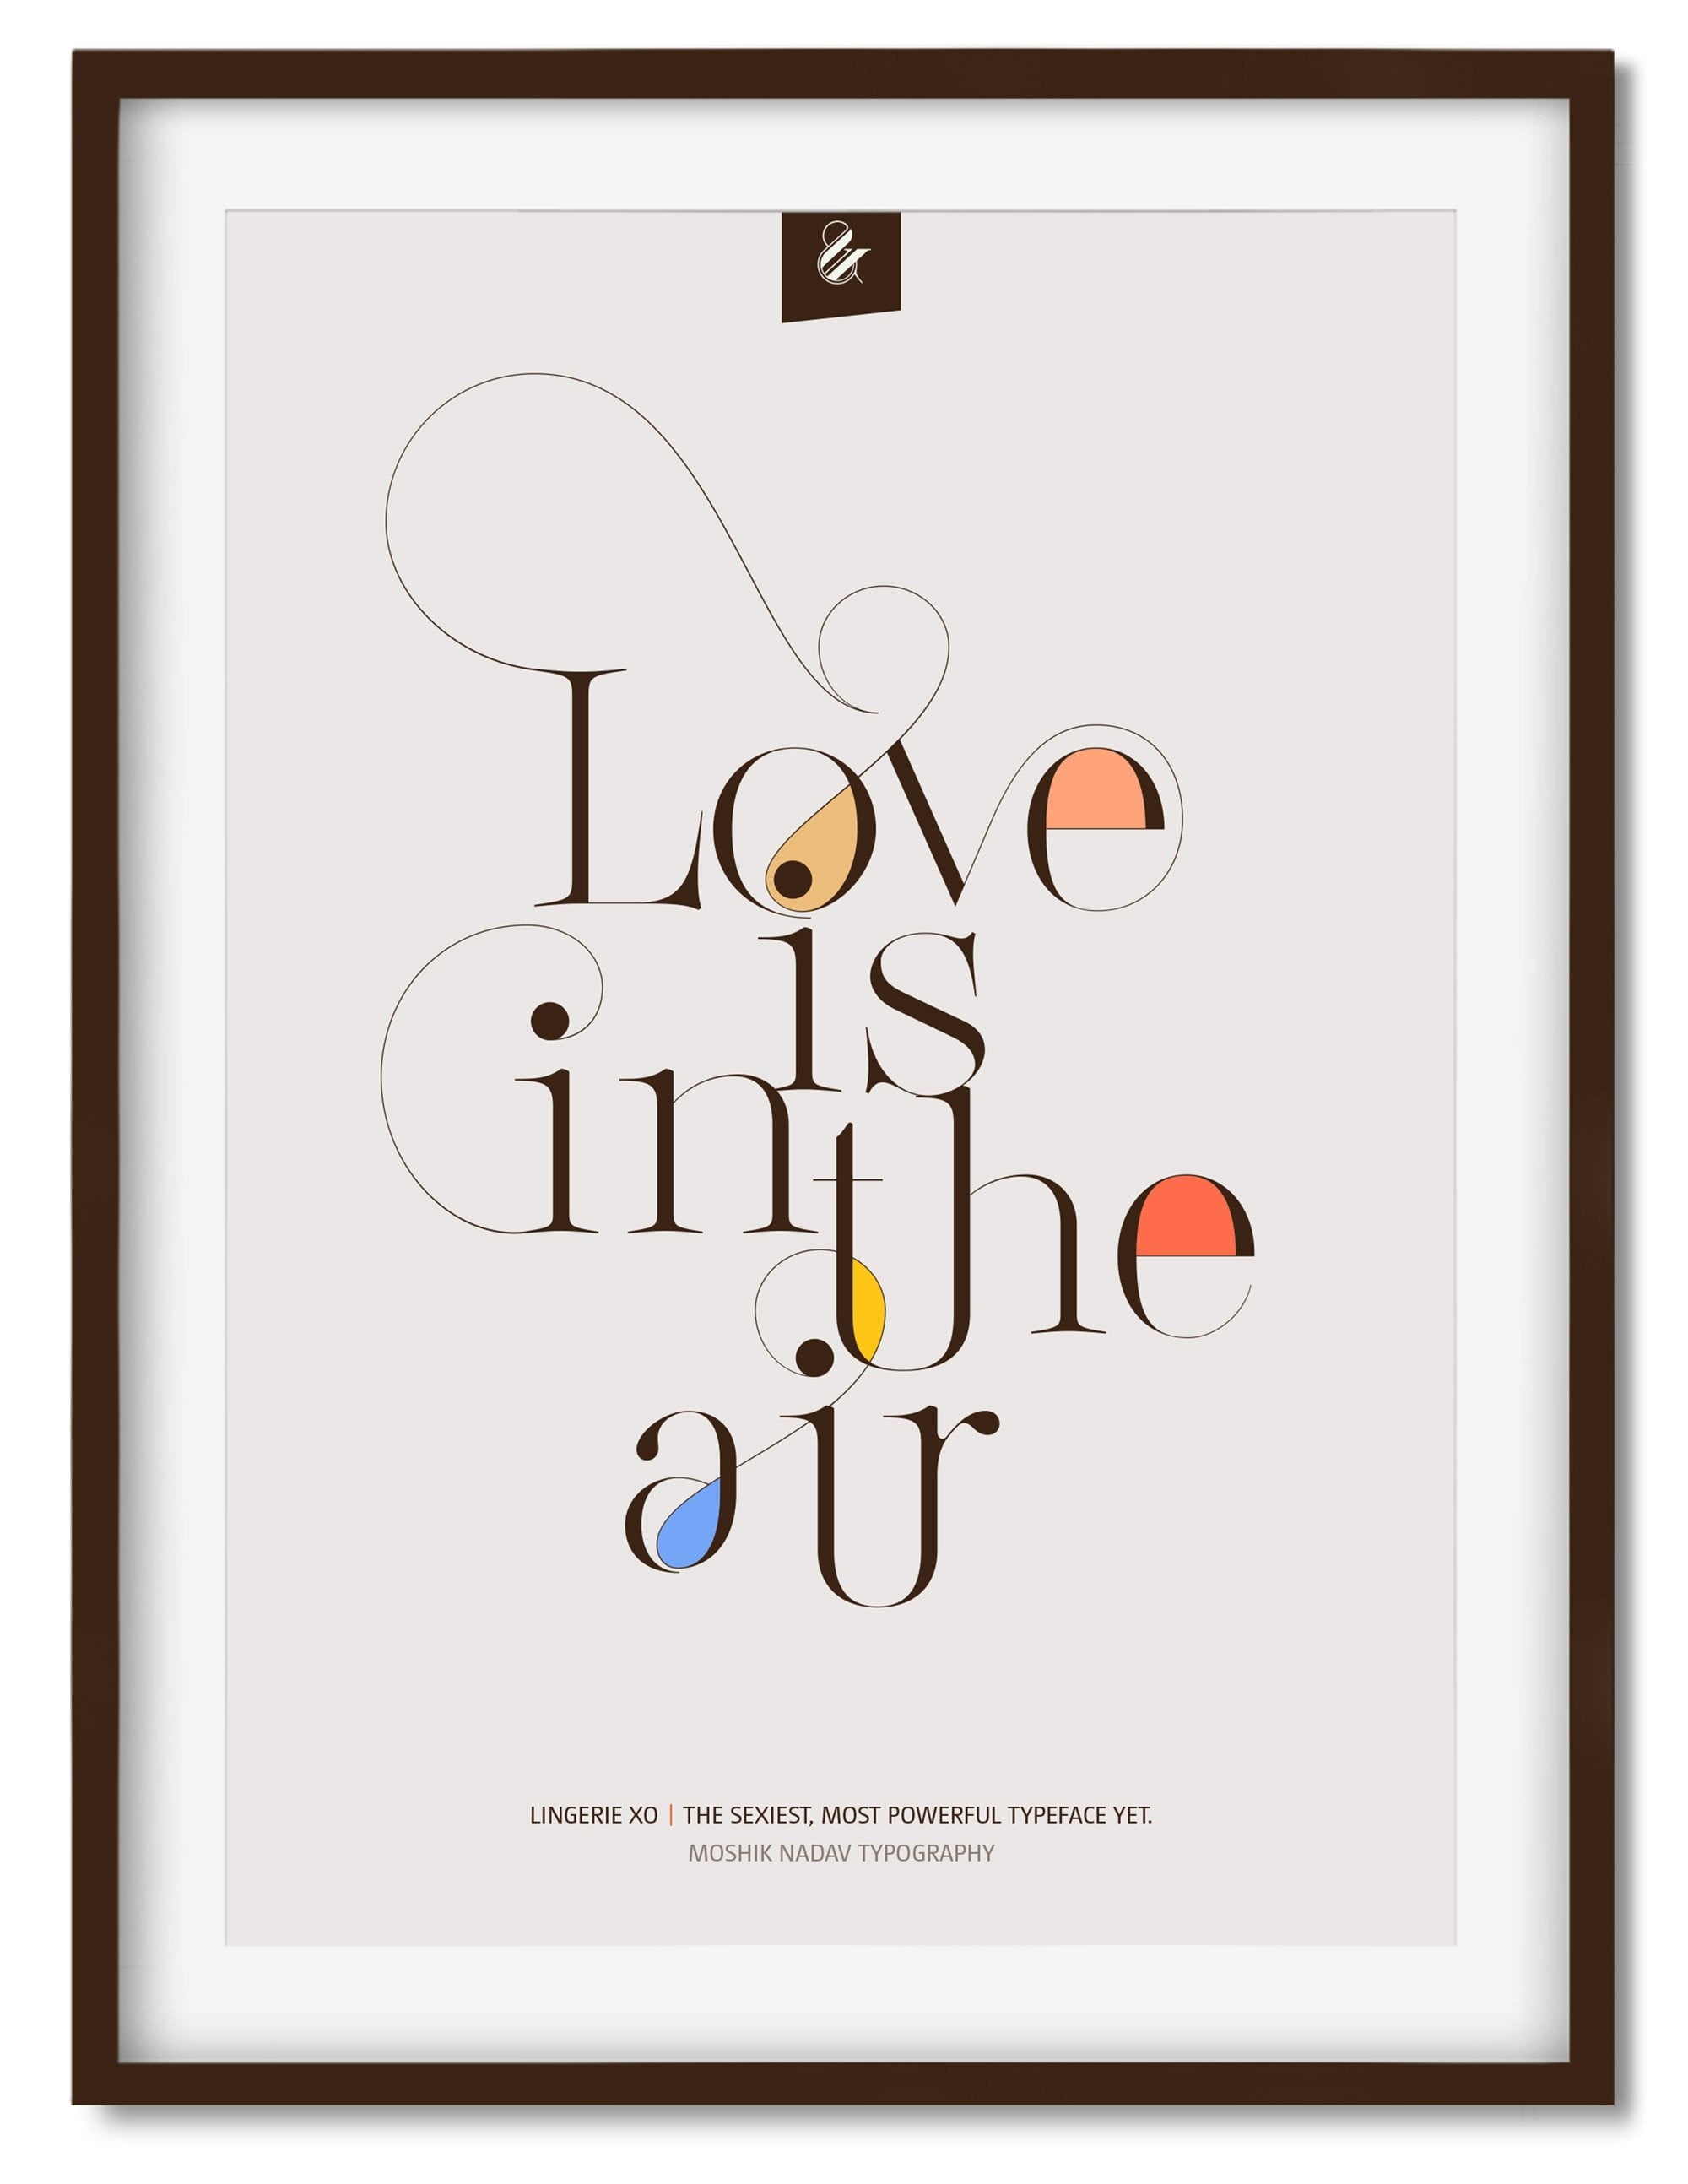 Love is in Typography Poster Fashion the by air Moshik Nadav